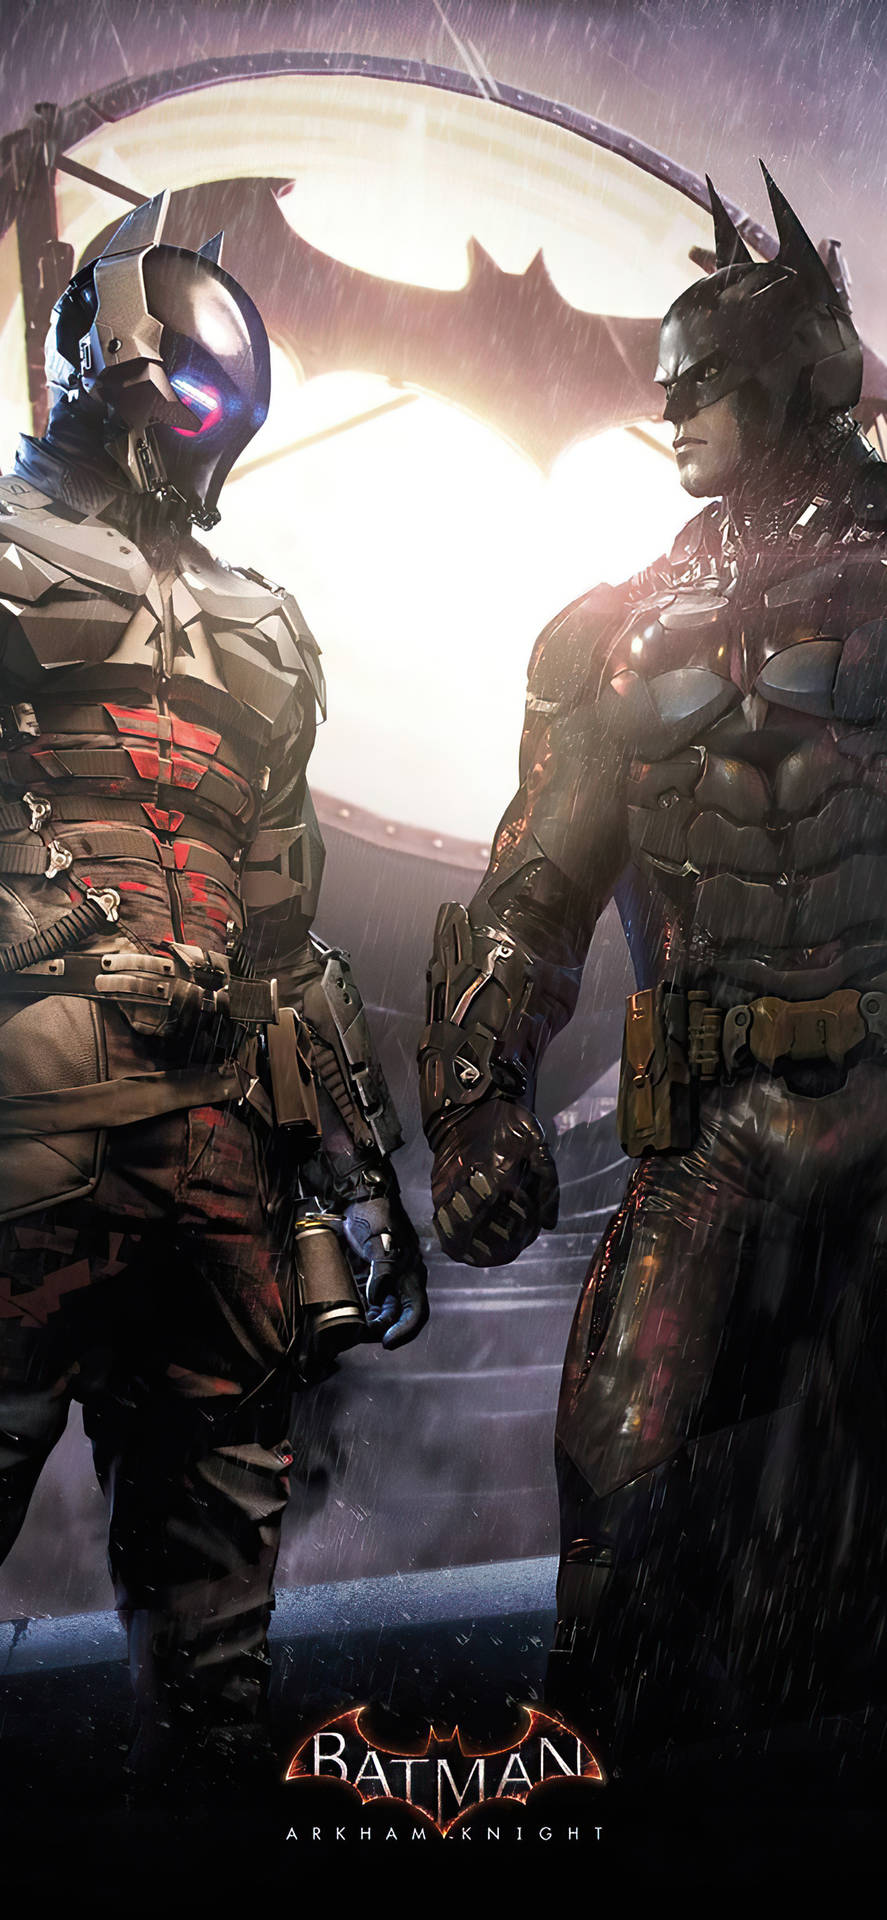 "The Action-Packed Face-off in Batman Arkham for iPhone" Wallpaper